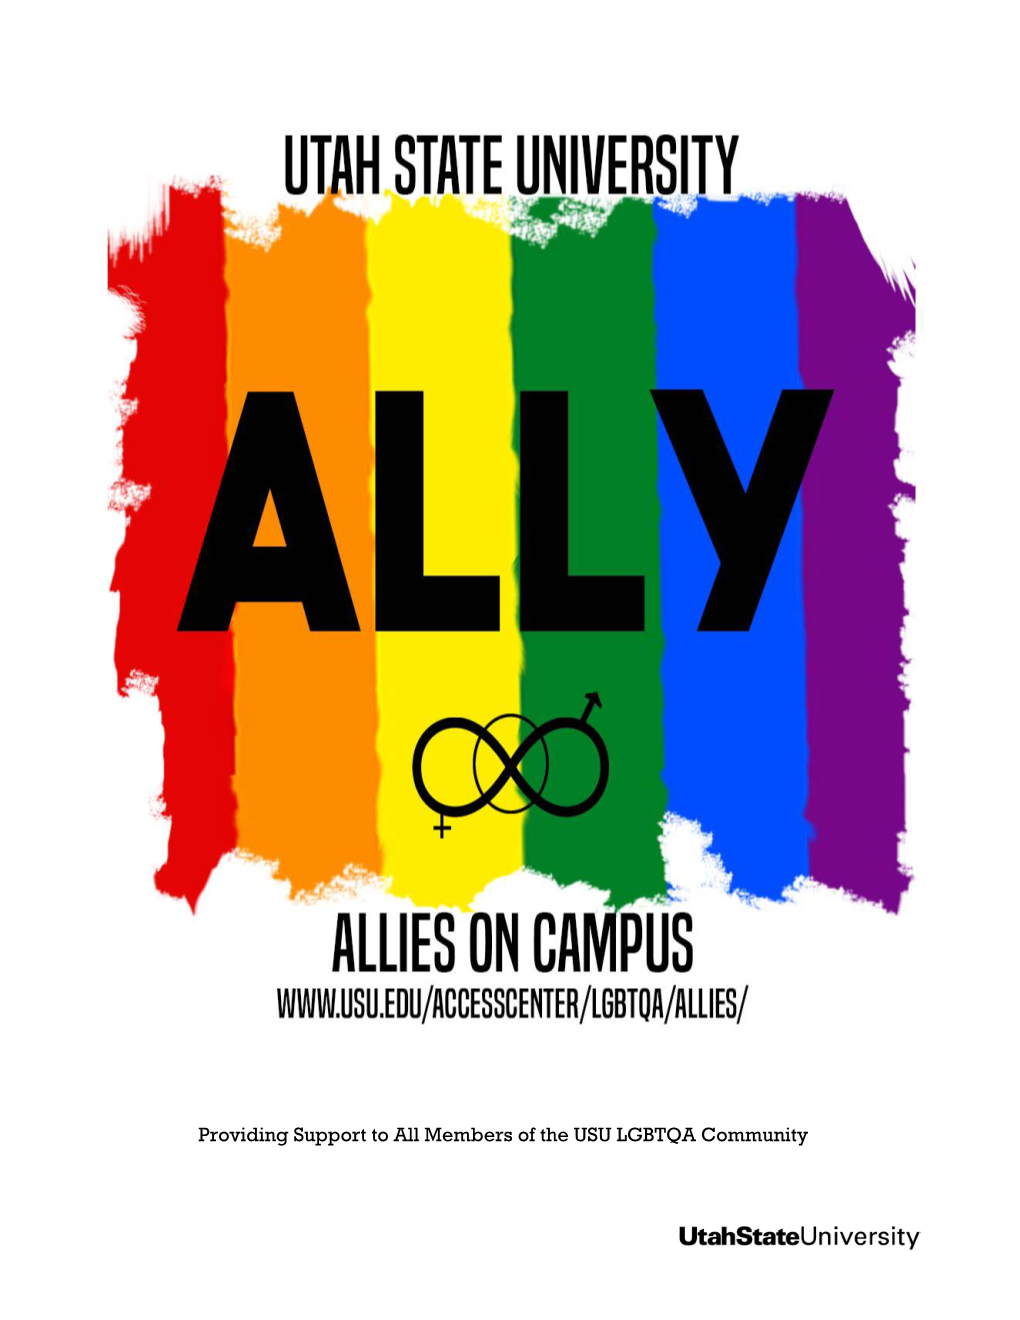 Providing Support to All Members of the USU LGBTQA Community